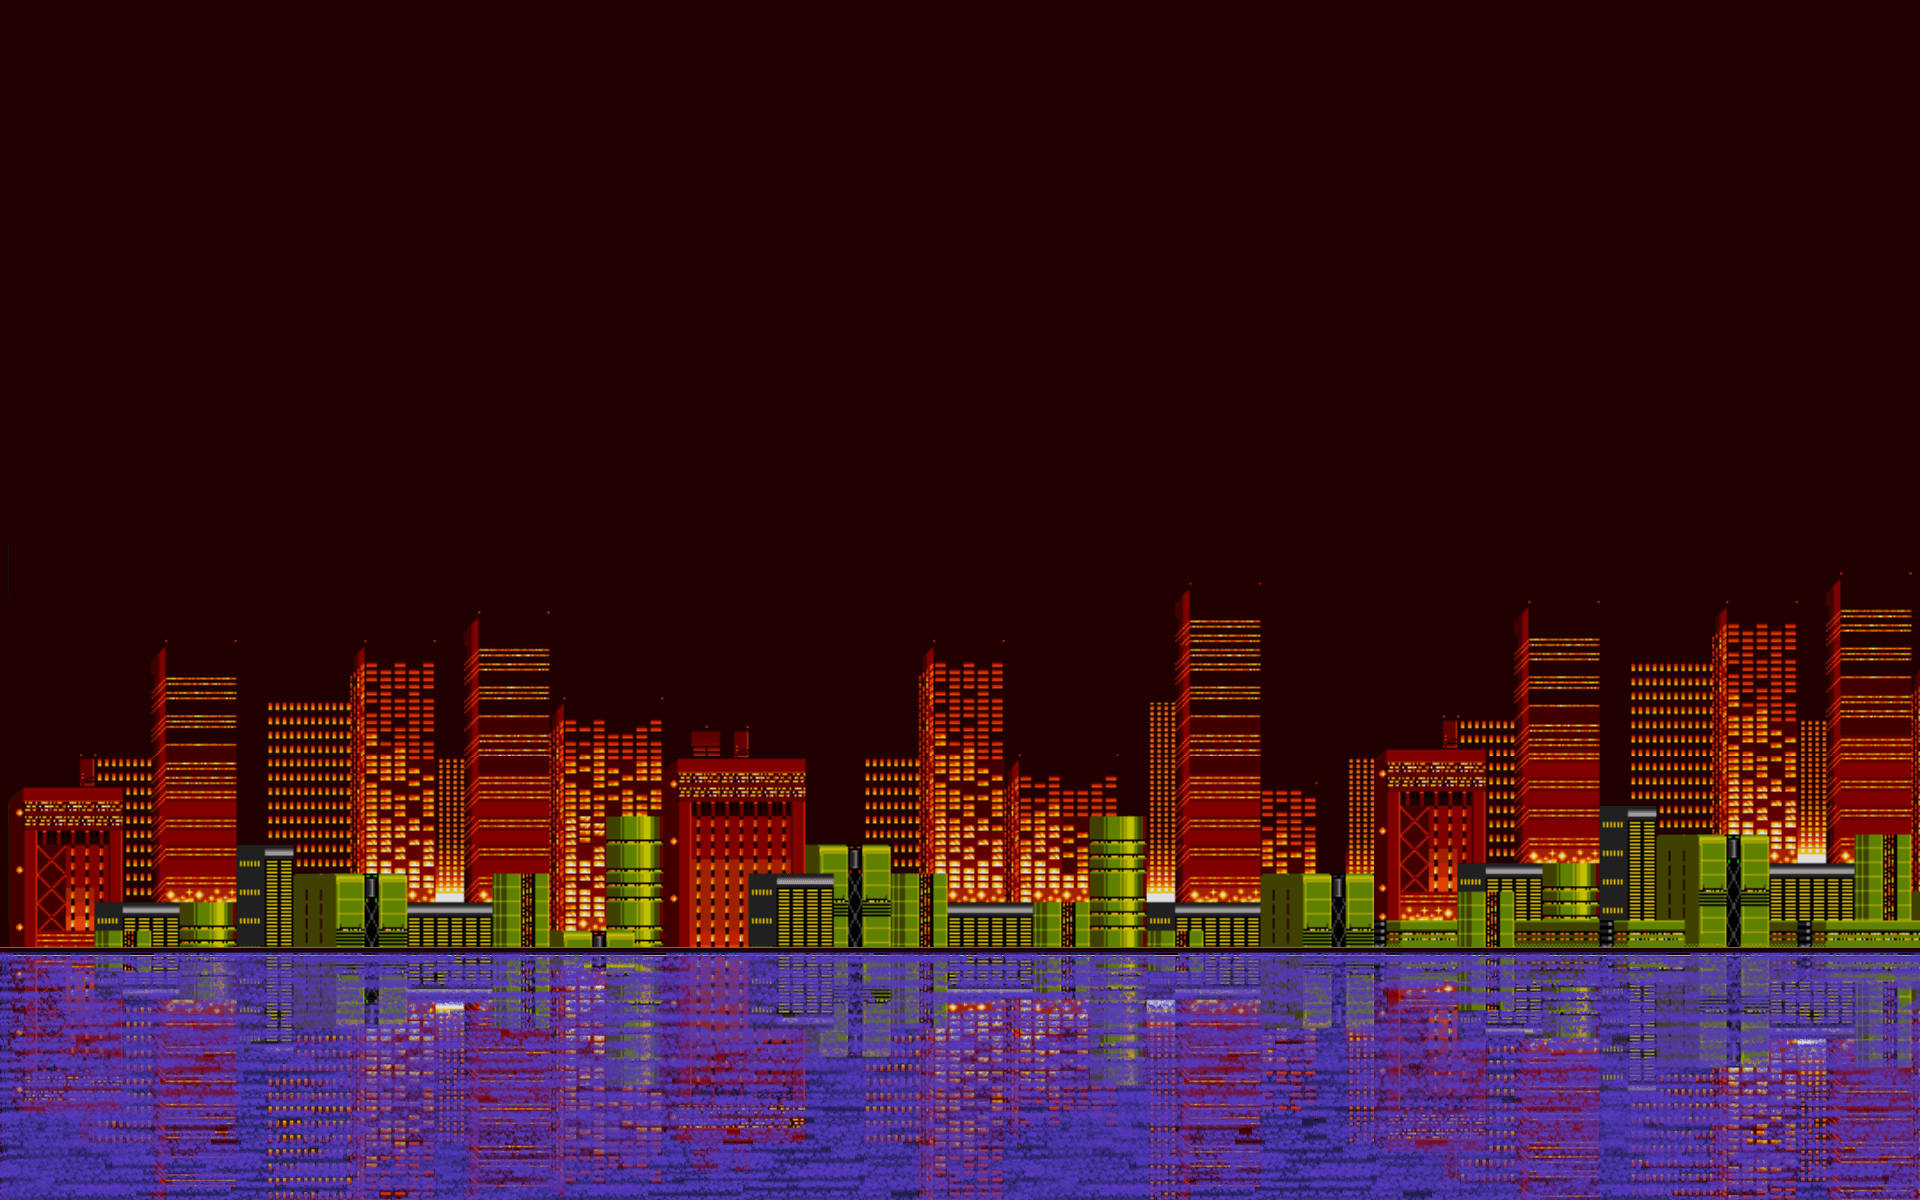 8 Bit 1920X1200 Wallpaper and Background Image